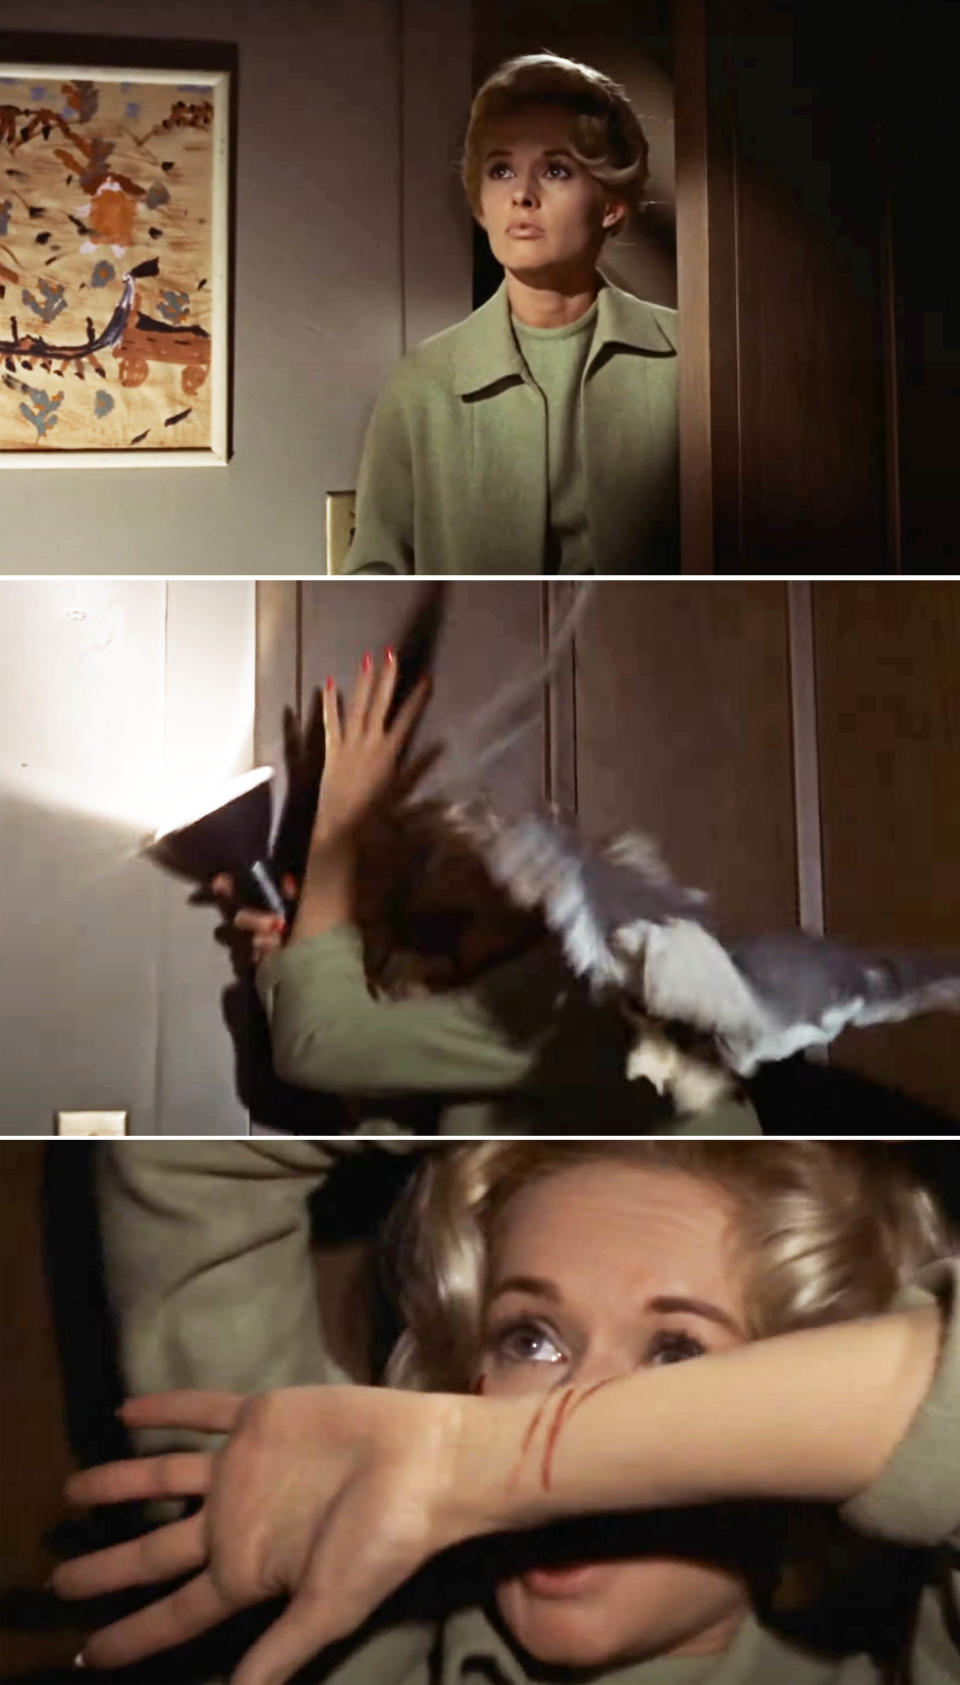 Three-panel collage from "The Birds" featuring Tippi Hedren in suspenseful scenes with attacking birds